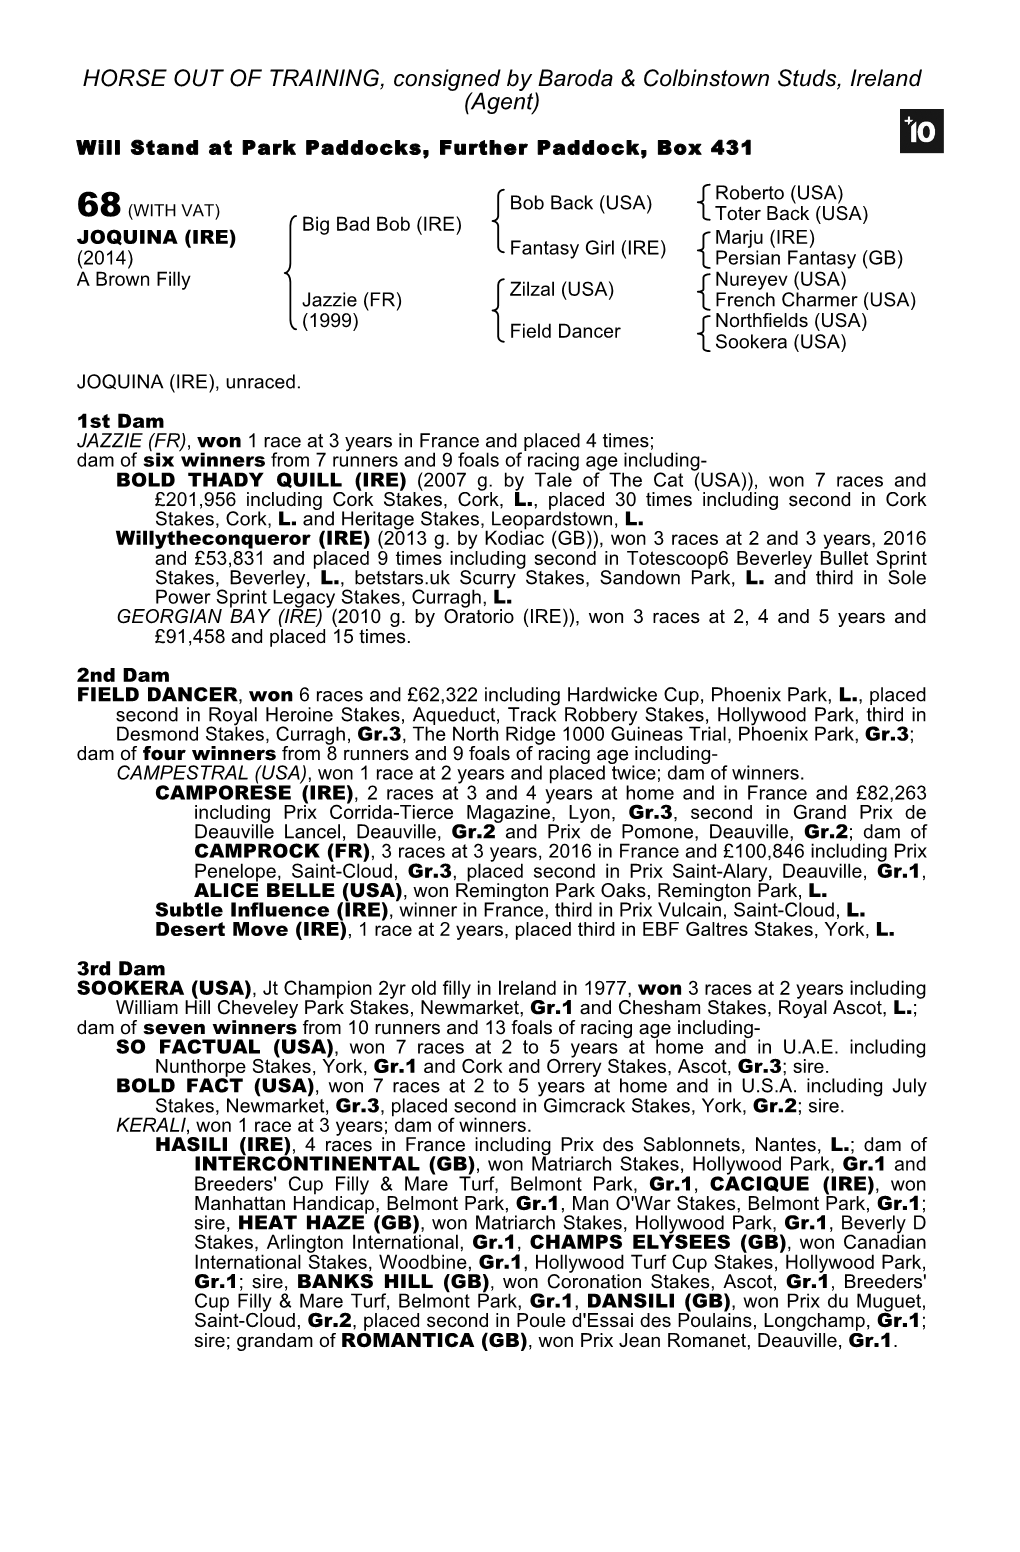 HORSE out of TRAINING, Consigned by Baroda & Colbinstown Studs, Ireland (Agent)